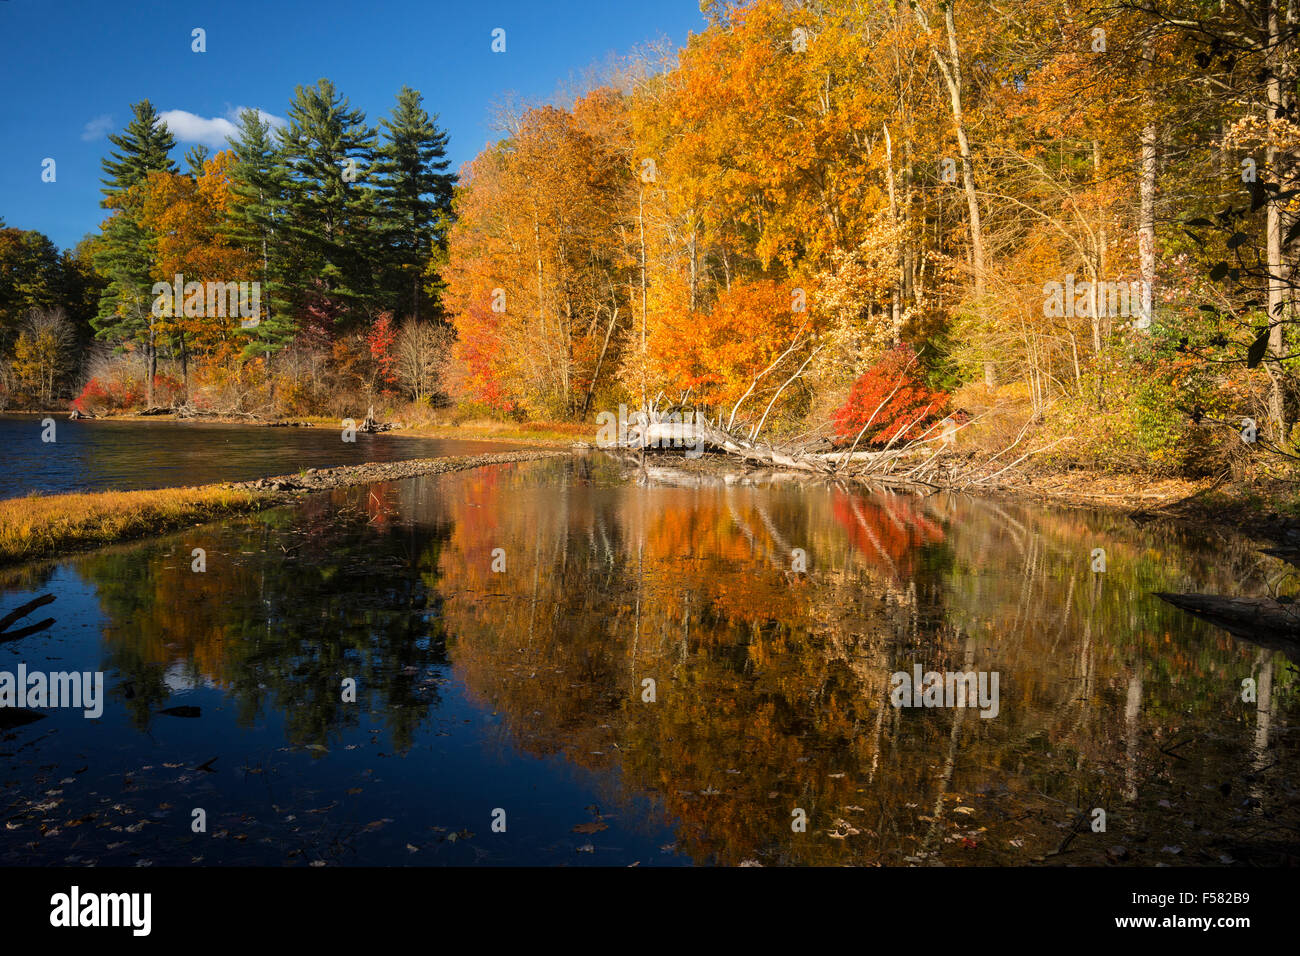 Brilliant fall foliage on the shoreline of Mansfield Lake in Connecticut, with reflections on the mirror surface of the water. Stock Photo